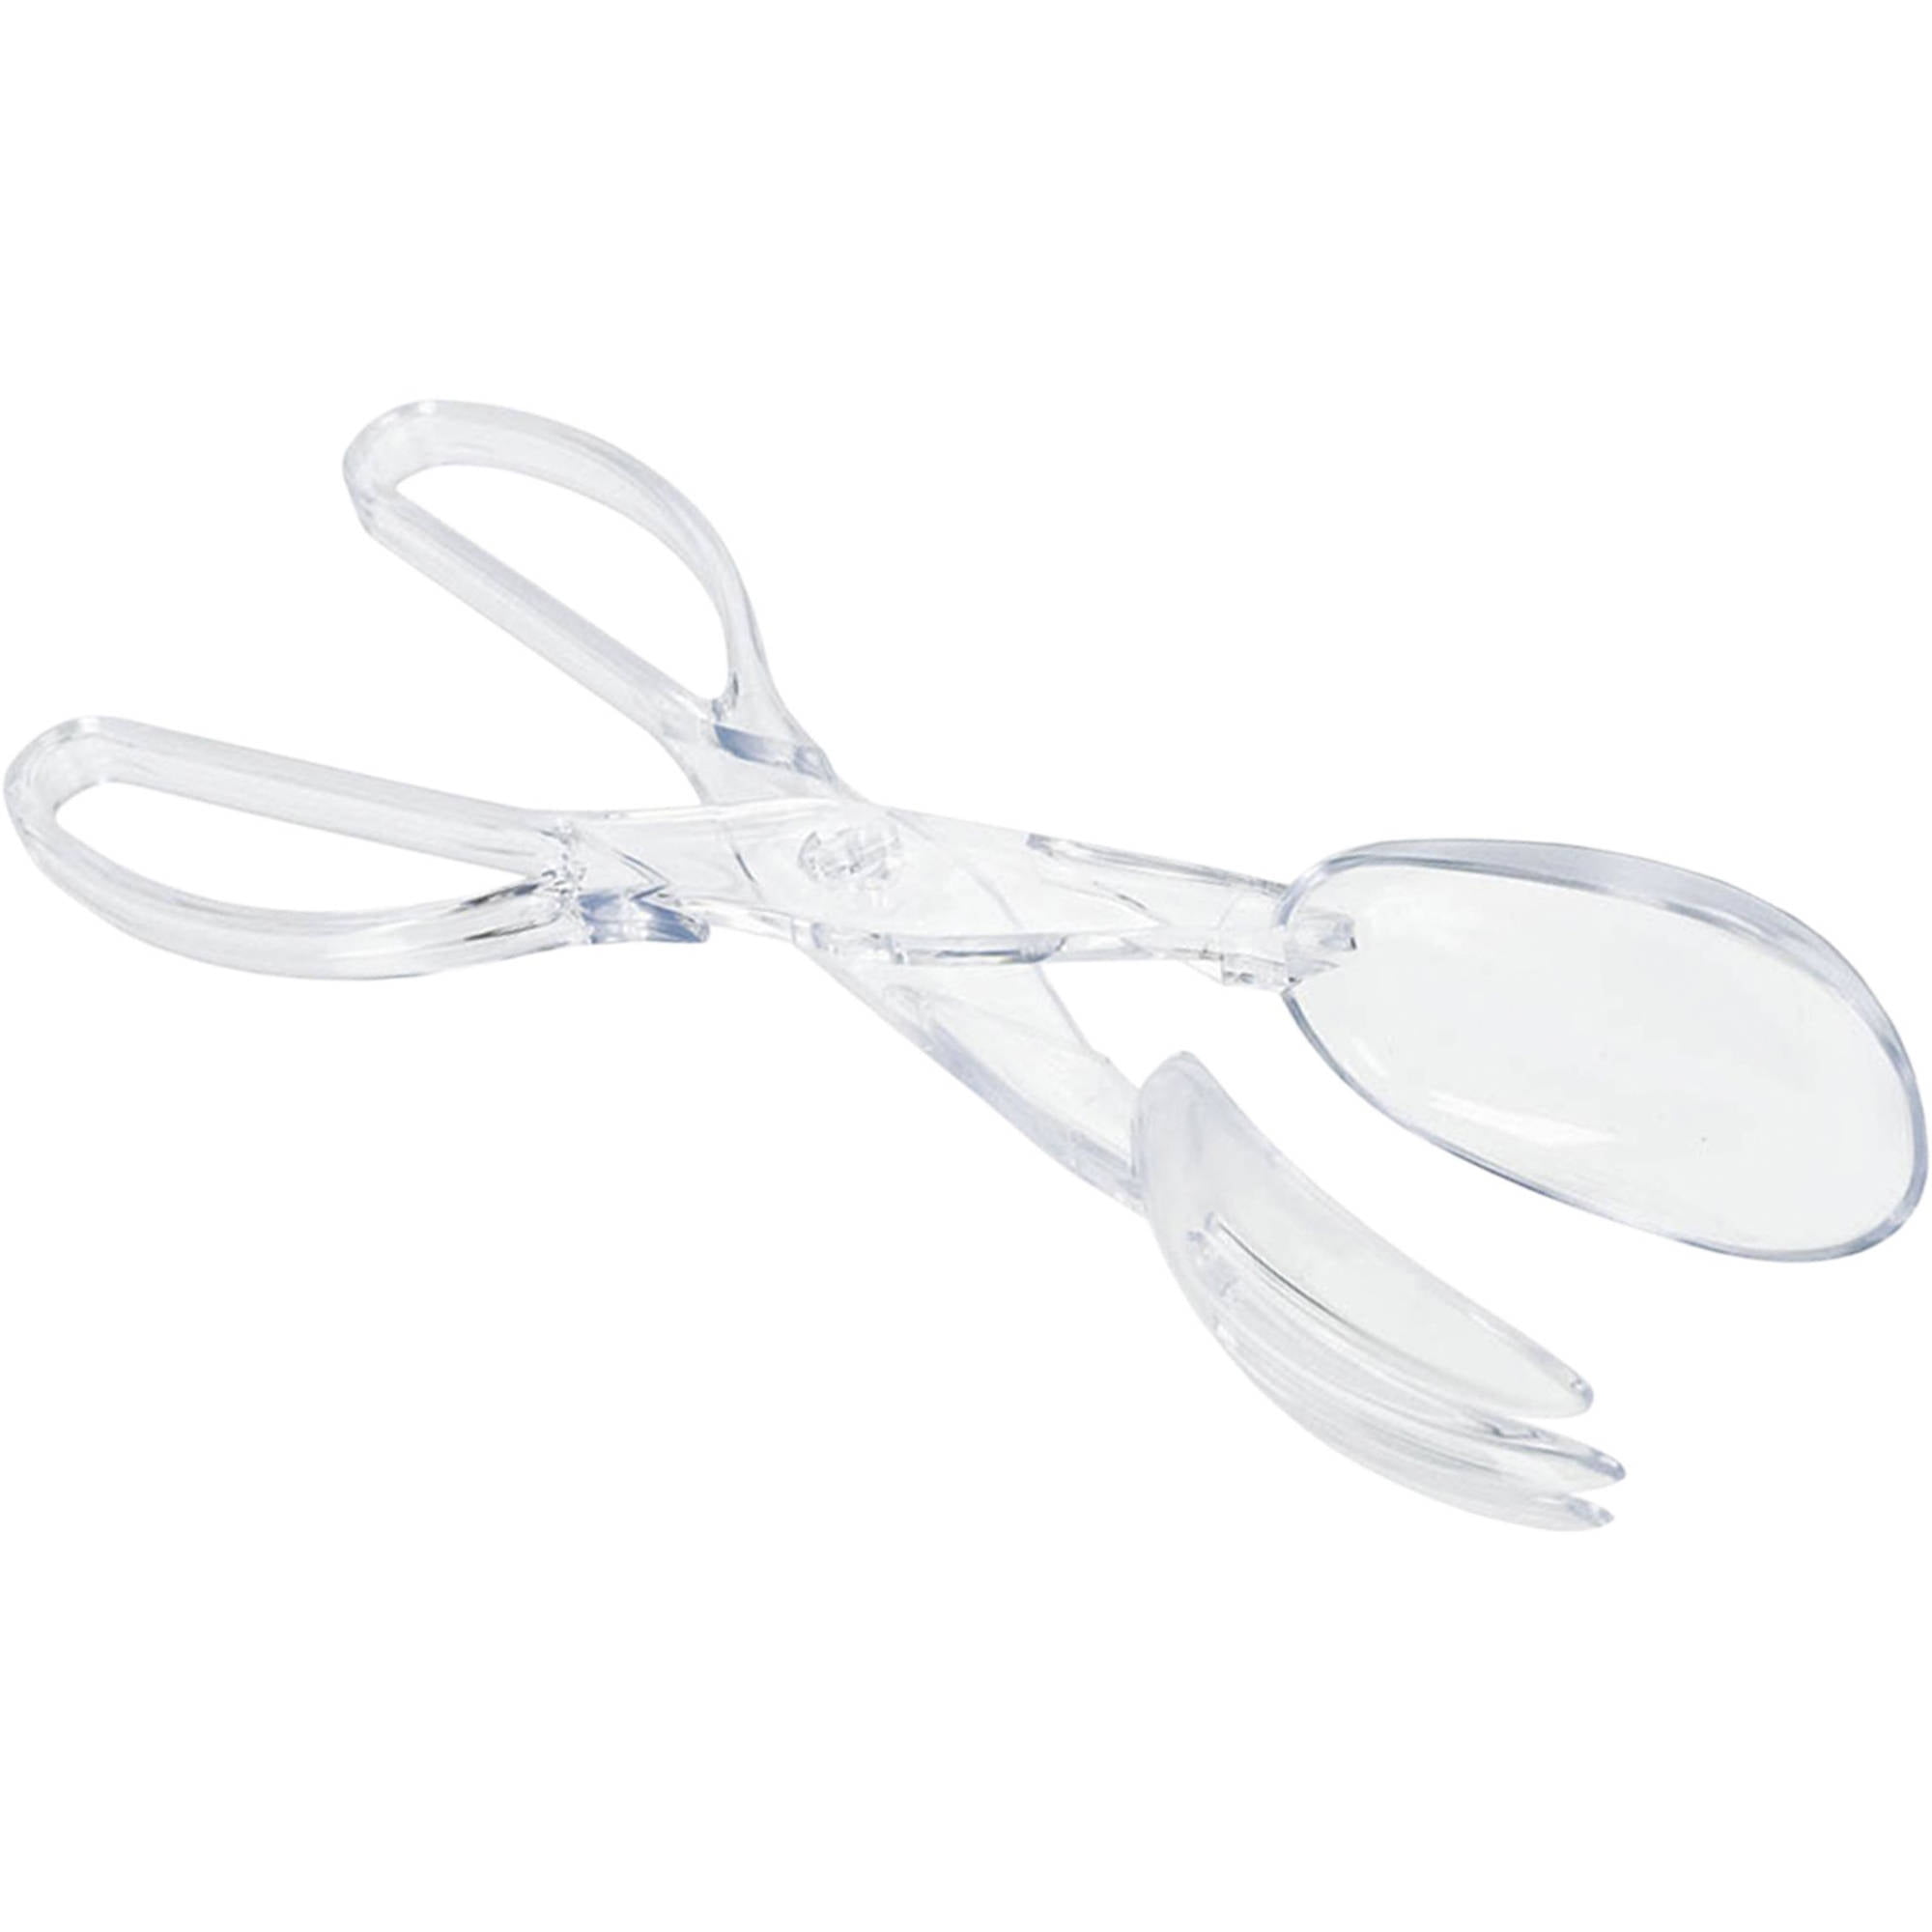 Norpro 1941 Acrylic Salad/Serving Tongs Clear 